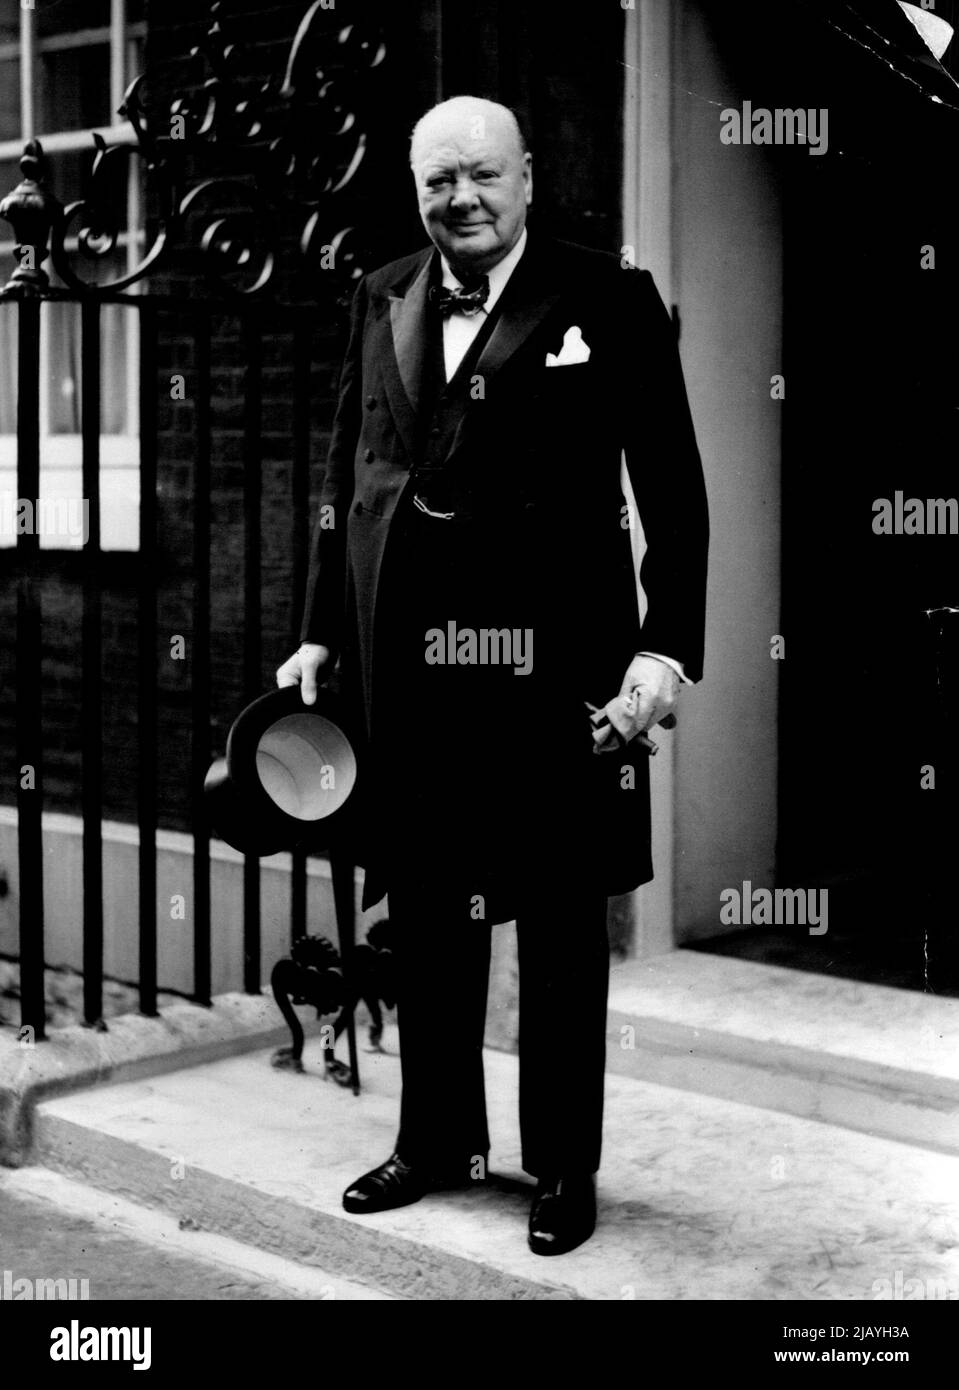 Sir Winston Churchill Resigns: Sir Winston Churchill leaving No. 10 Downing Street for Buckingham Palace to tender his resignation to H.M. the Queen. April 05, 1955. (Photo by Daily Herald). Stock Photo